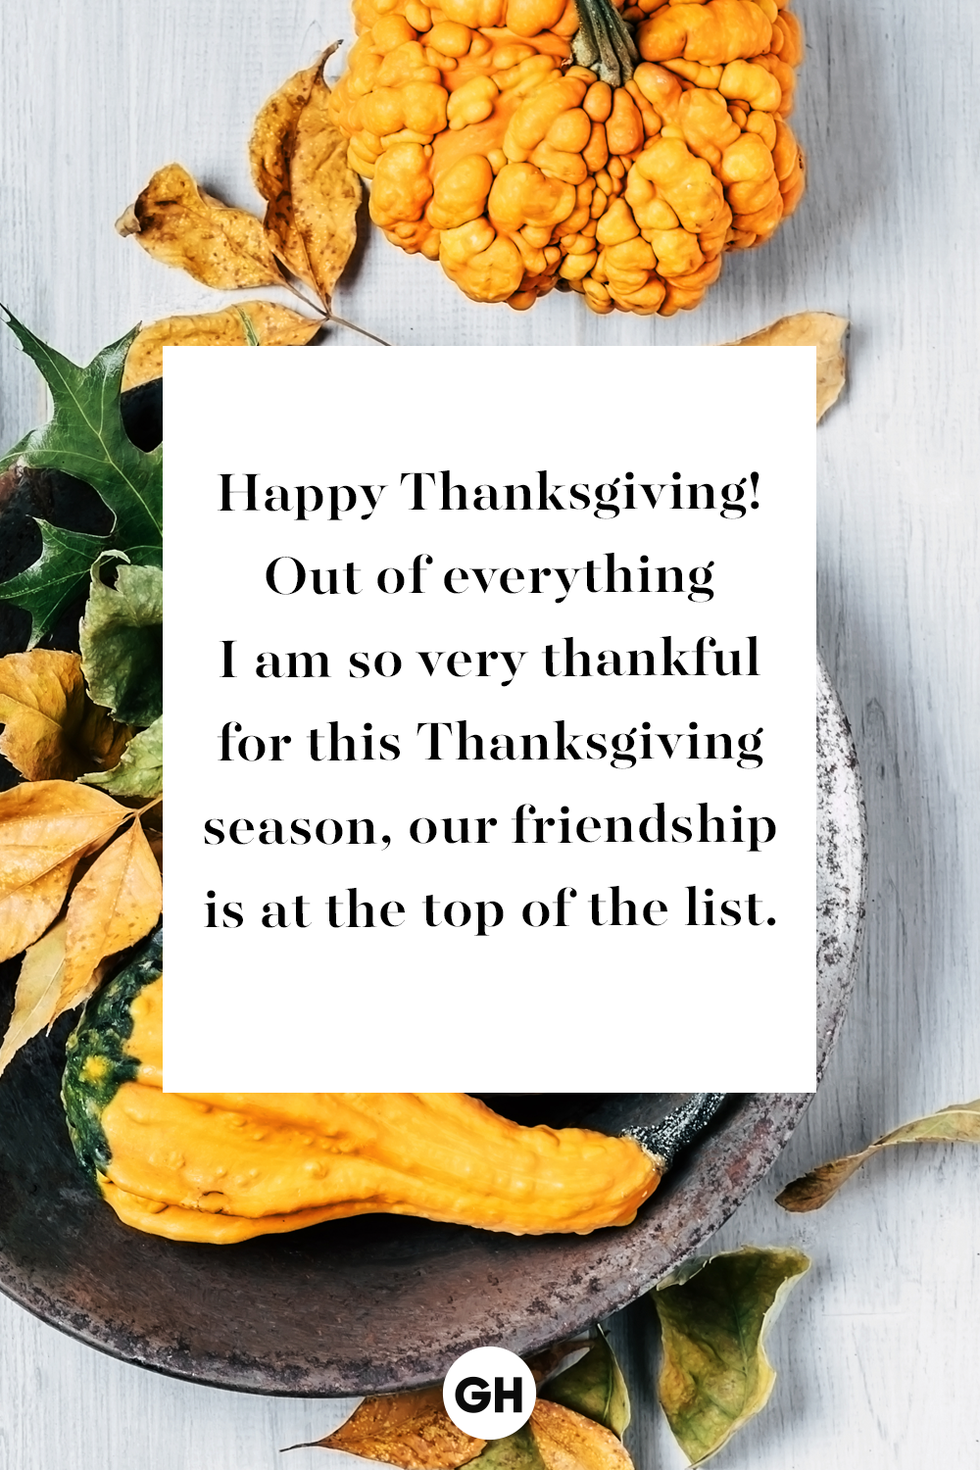 Happy Thanksgiving Quotes For Friends And Family - Hailee Marcellina